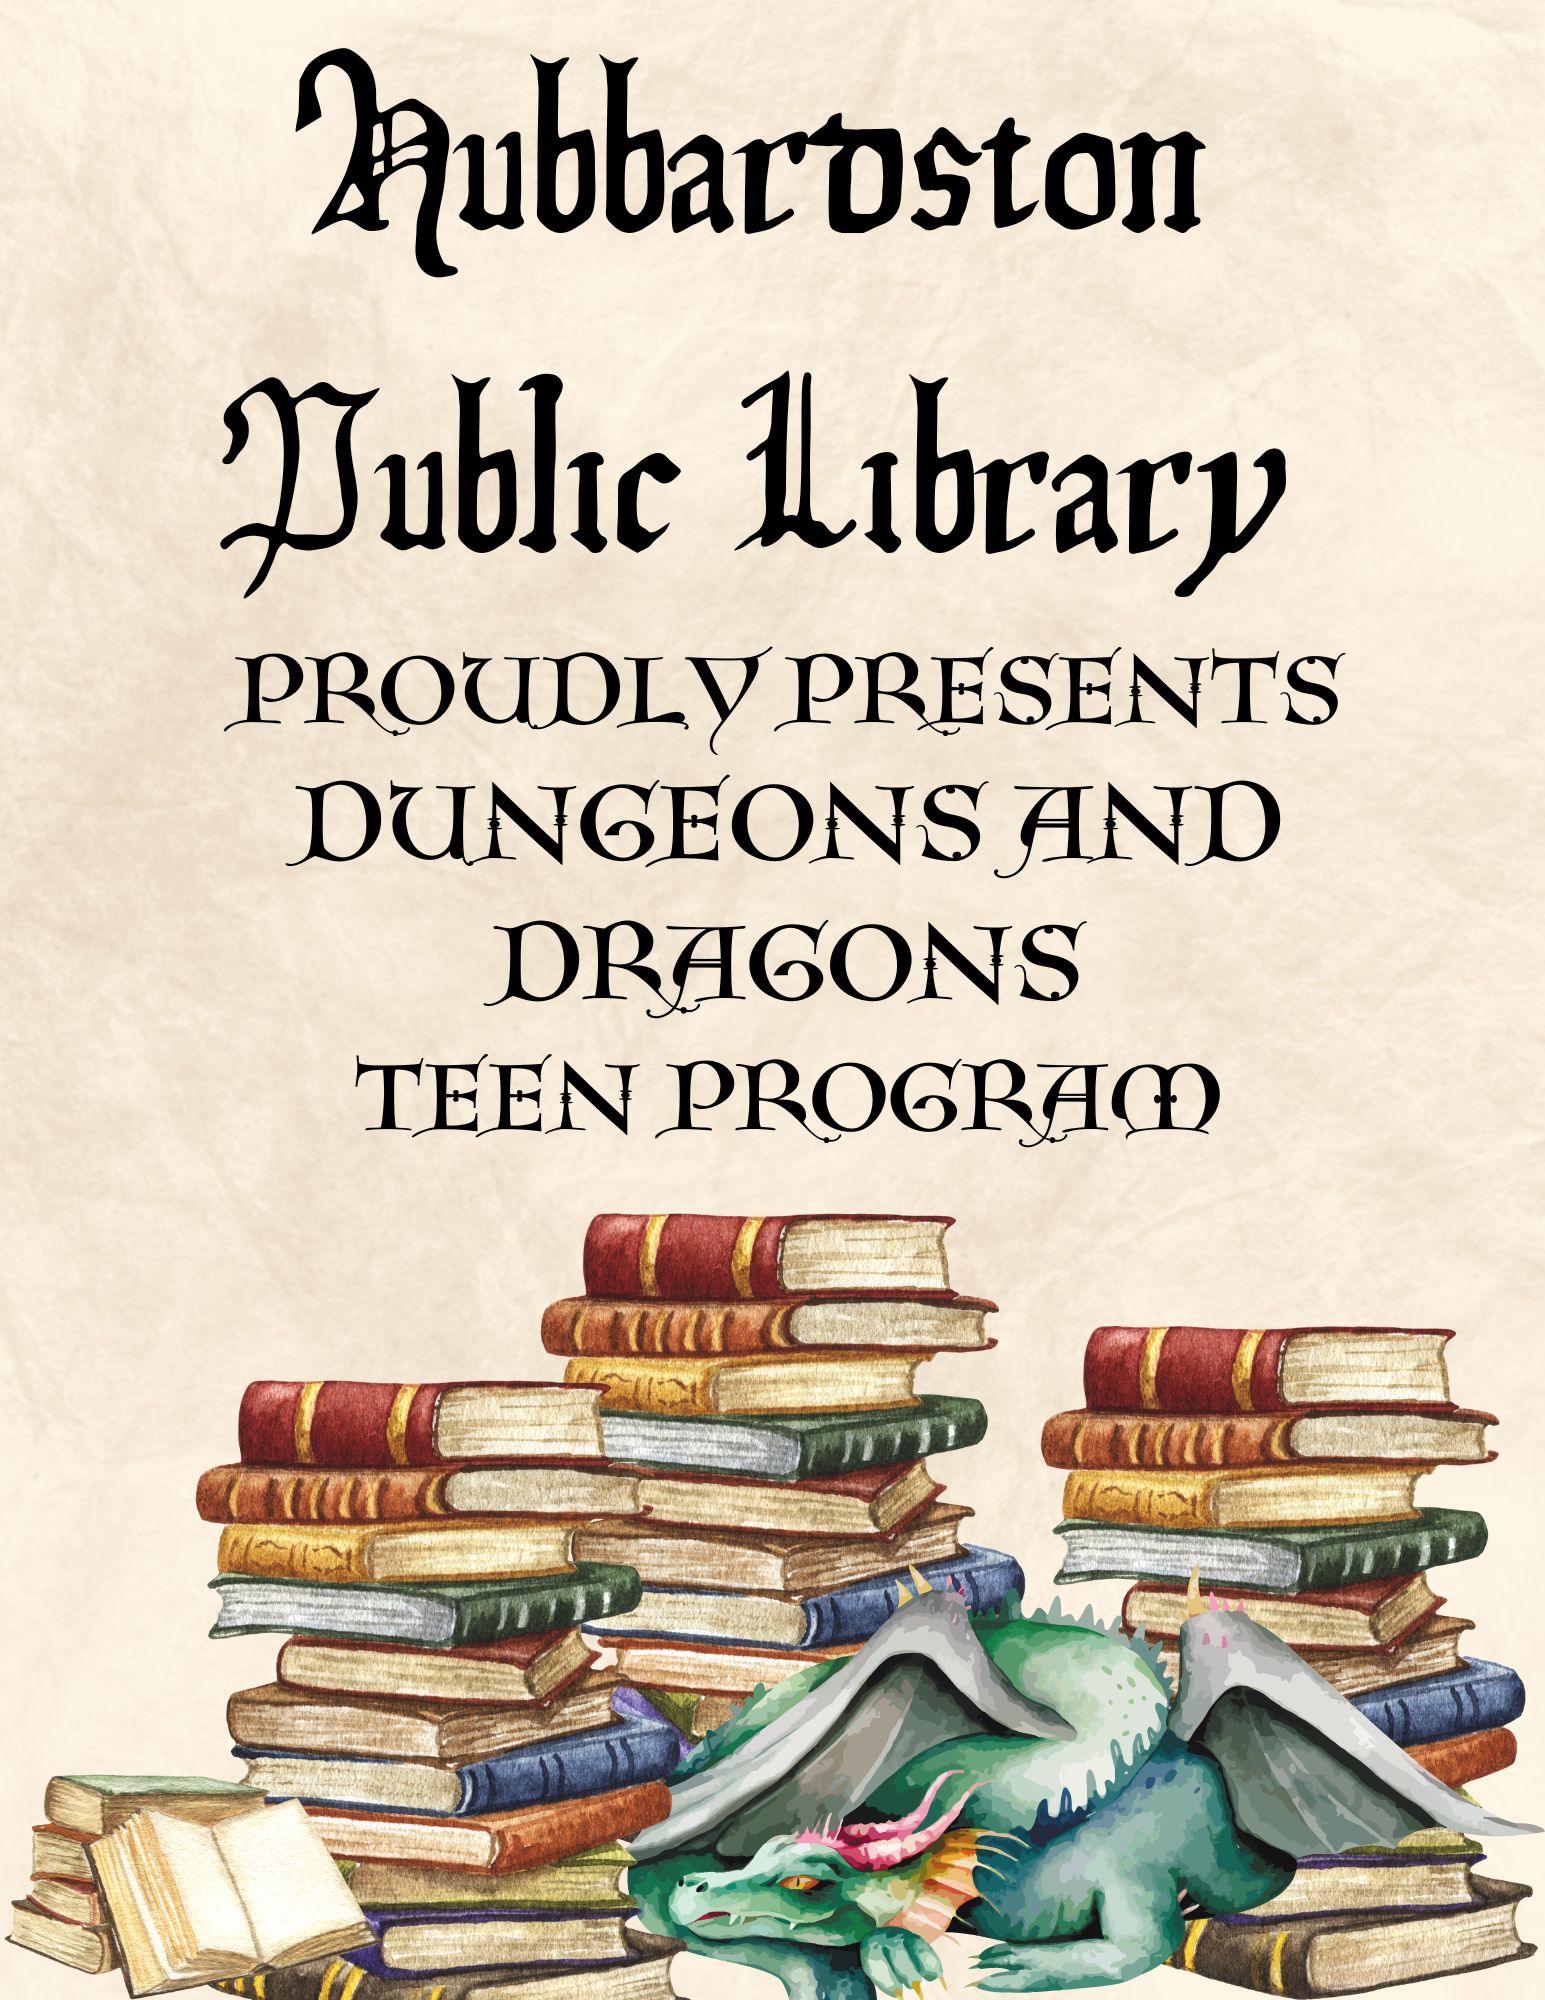 Flyer with books and a dragon that reads Hubbardston Public Library Proudly presents Dungeons and dragons teen program